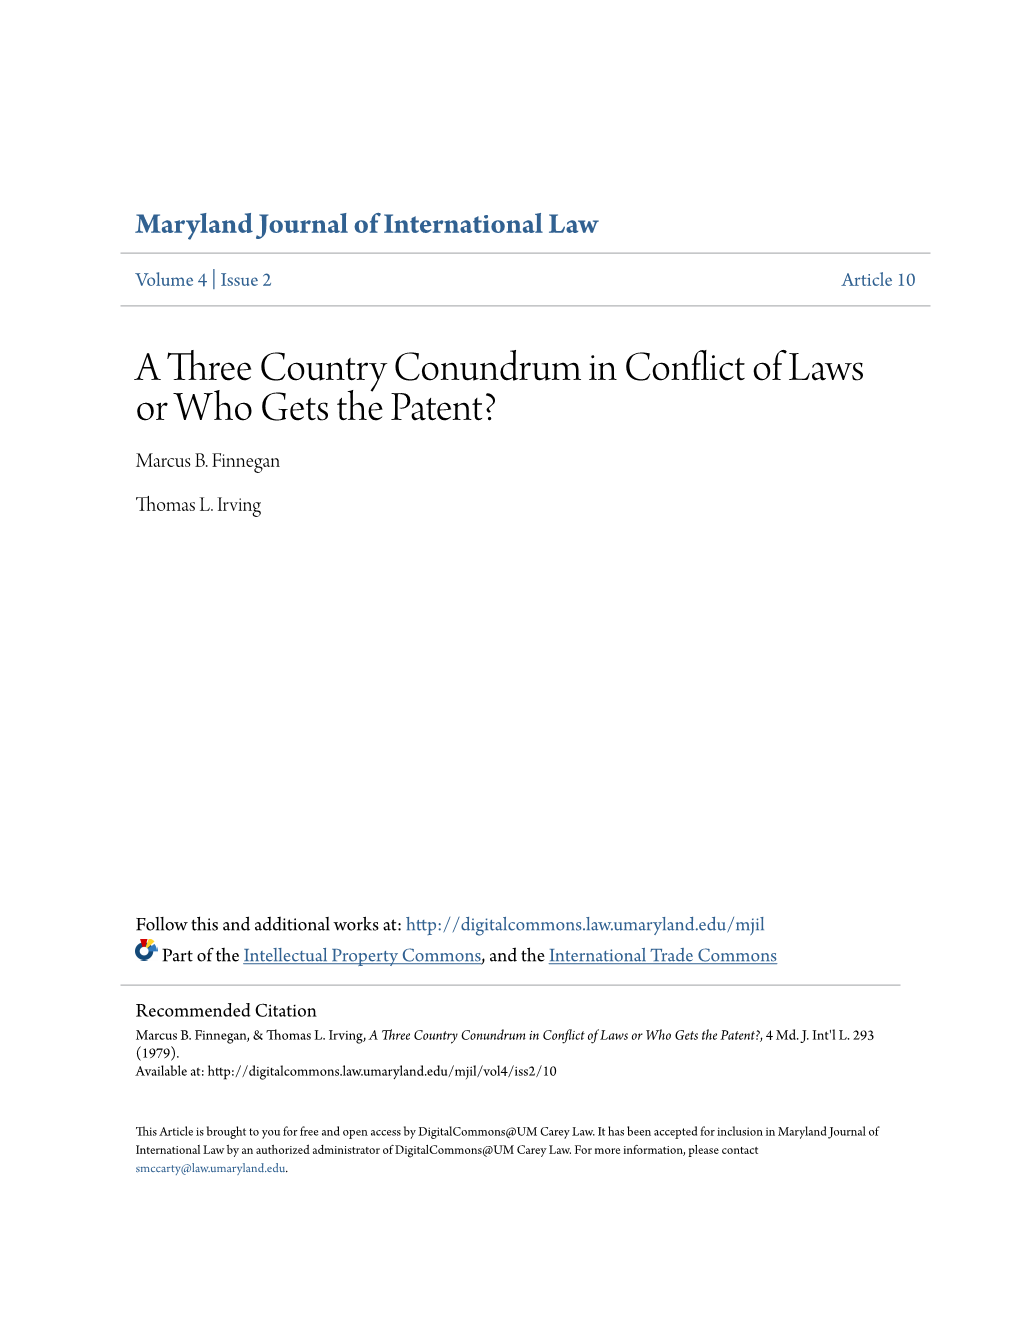 A Three Country Conundrum in Conflict of Laws Or Who Gets the Patent? Marcus B